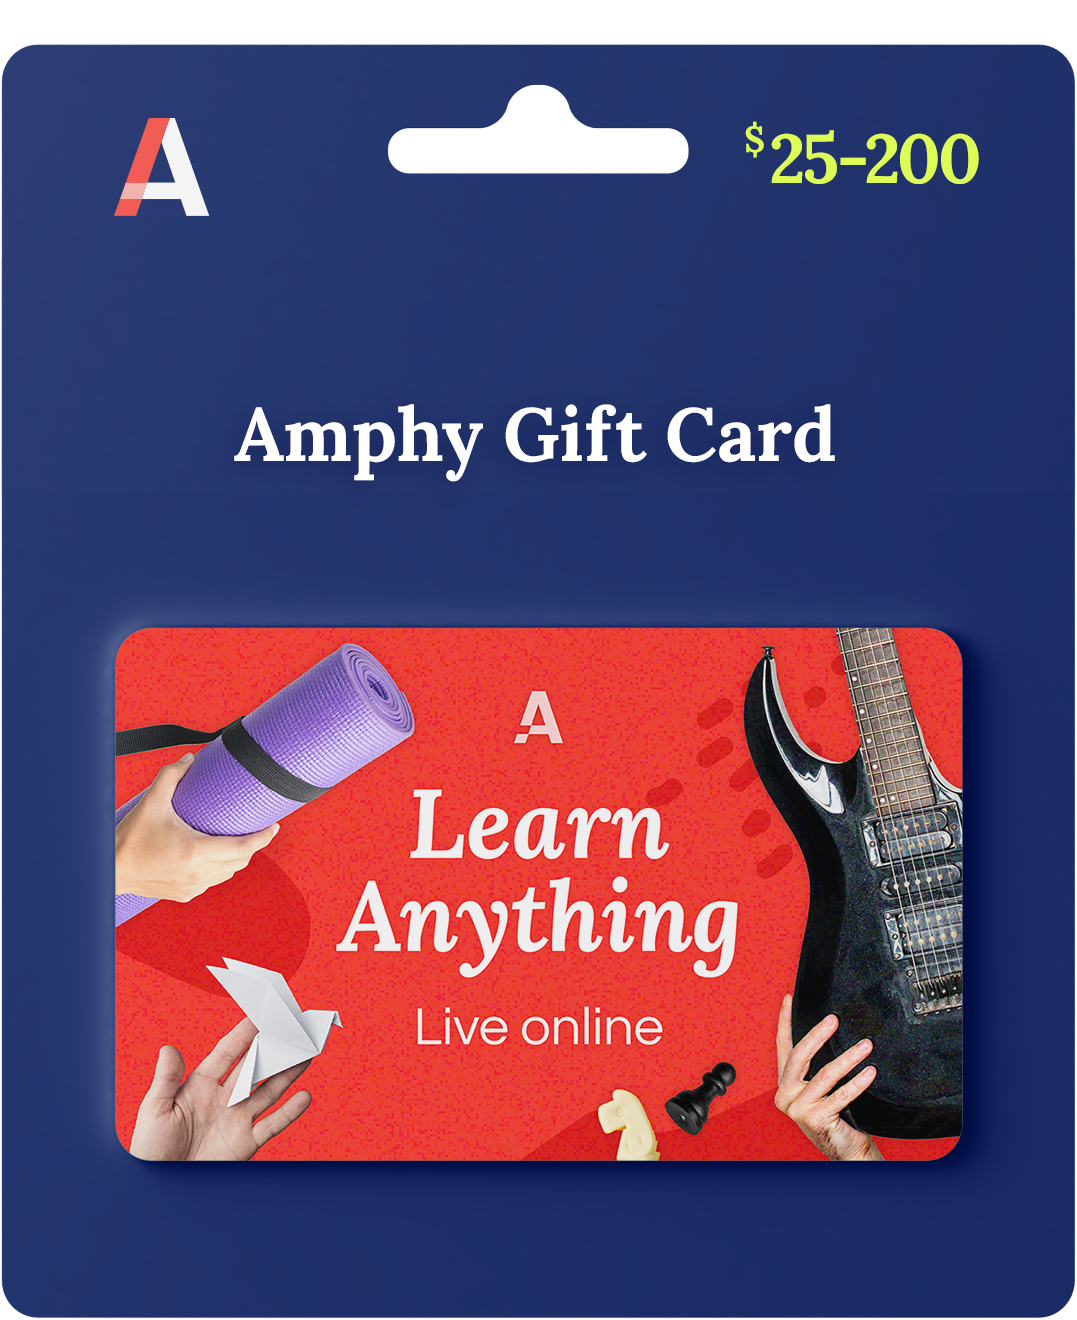 Amphy gift card (Credit: Adcore inc)